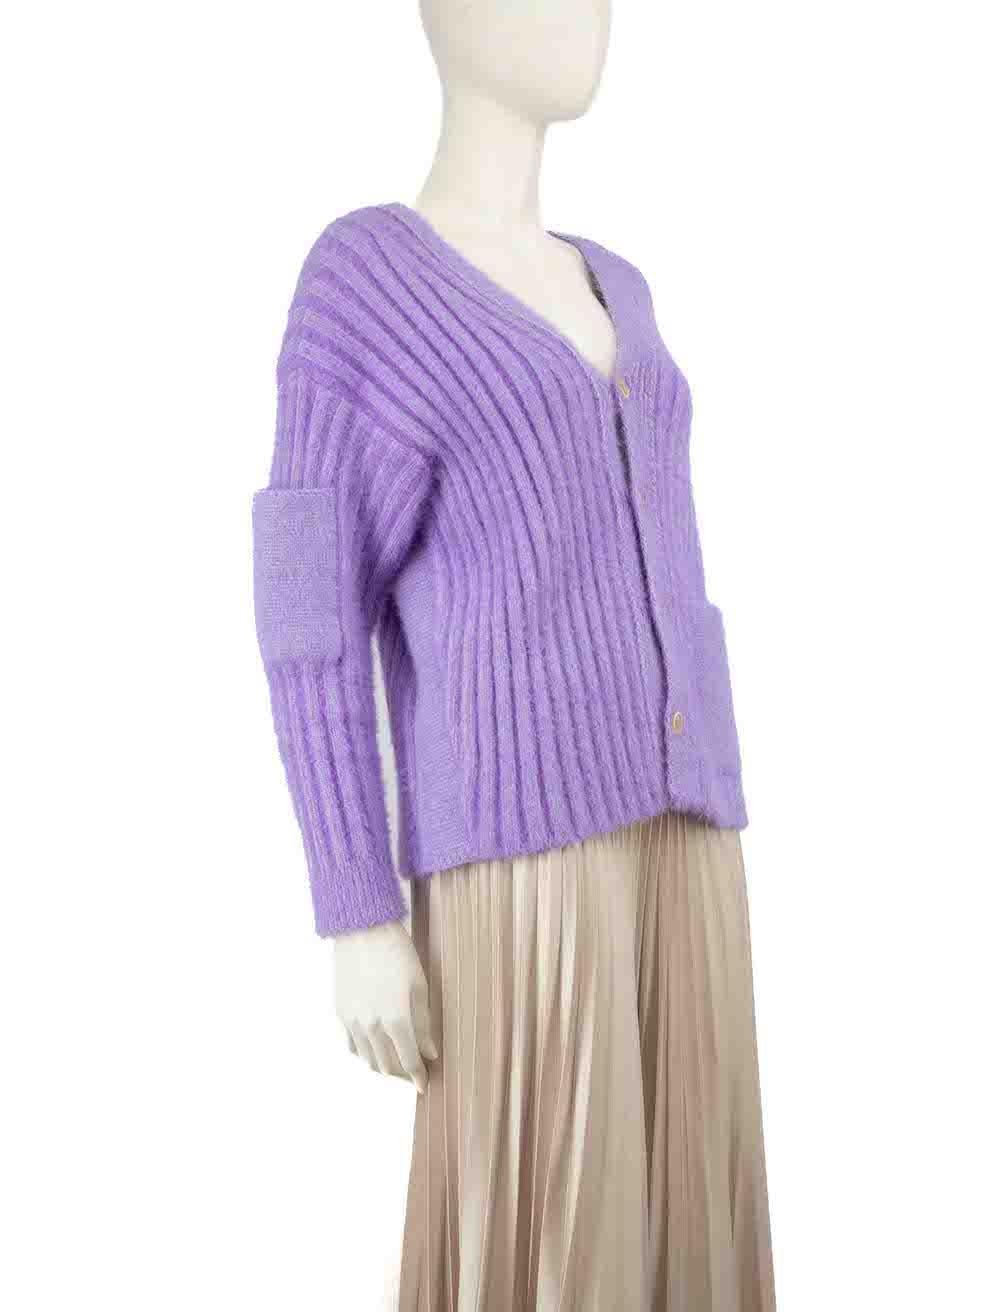 CONDITION is Very good. Hardly any visible wear to cardigan is evident on this used Jacquemus designer resale item.
 
 
 
 Details
 
 
 Model: Le Cardigan Neve
 
 Purple
 
 Viscose
 
 Knit cardigan
 
 V-neck
 
 Button up fastening
 
 Long sleeves
 
